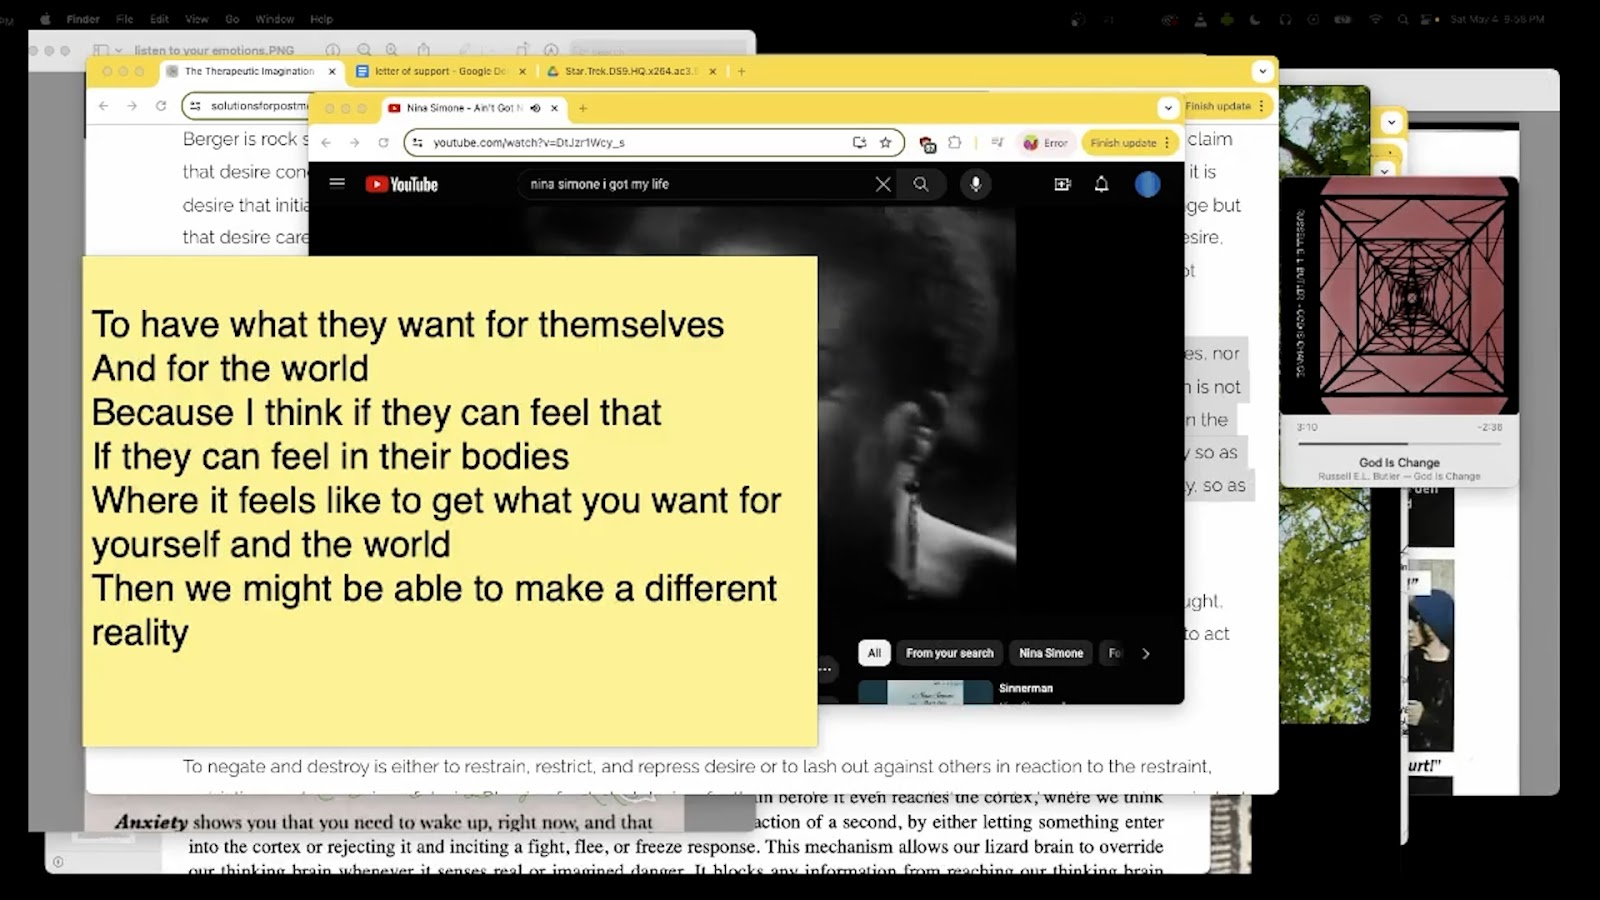 Image: Still from Claire Fleming Staples’ “The Master’s Feelings” at PS1 Close House. A screenshot of a desktop with several open tabs. One window is a Youtube video of Nina Simone’s “I Got my Life.” Another window behind the first has a few tabs visible: The Therapeutic Imagination, letter of support, Star Trek. A yellow sticky note in the foreground reads, “To have what they want for themselves and for the world because I think if they can feel that, if they can feel in their bodies where it feels like to get what you want for yourself and the world then we might be able to make a different reality. Photo courtesy of the artist